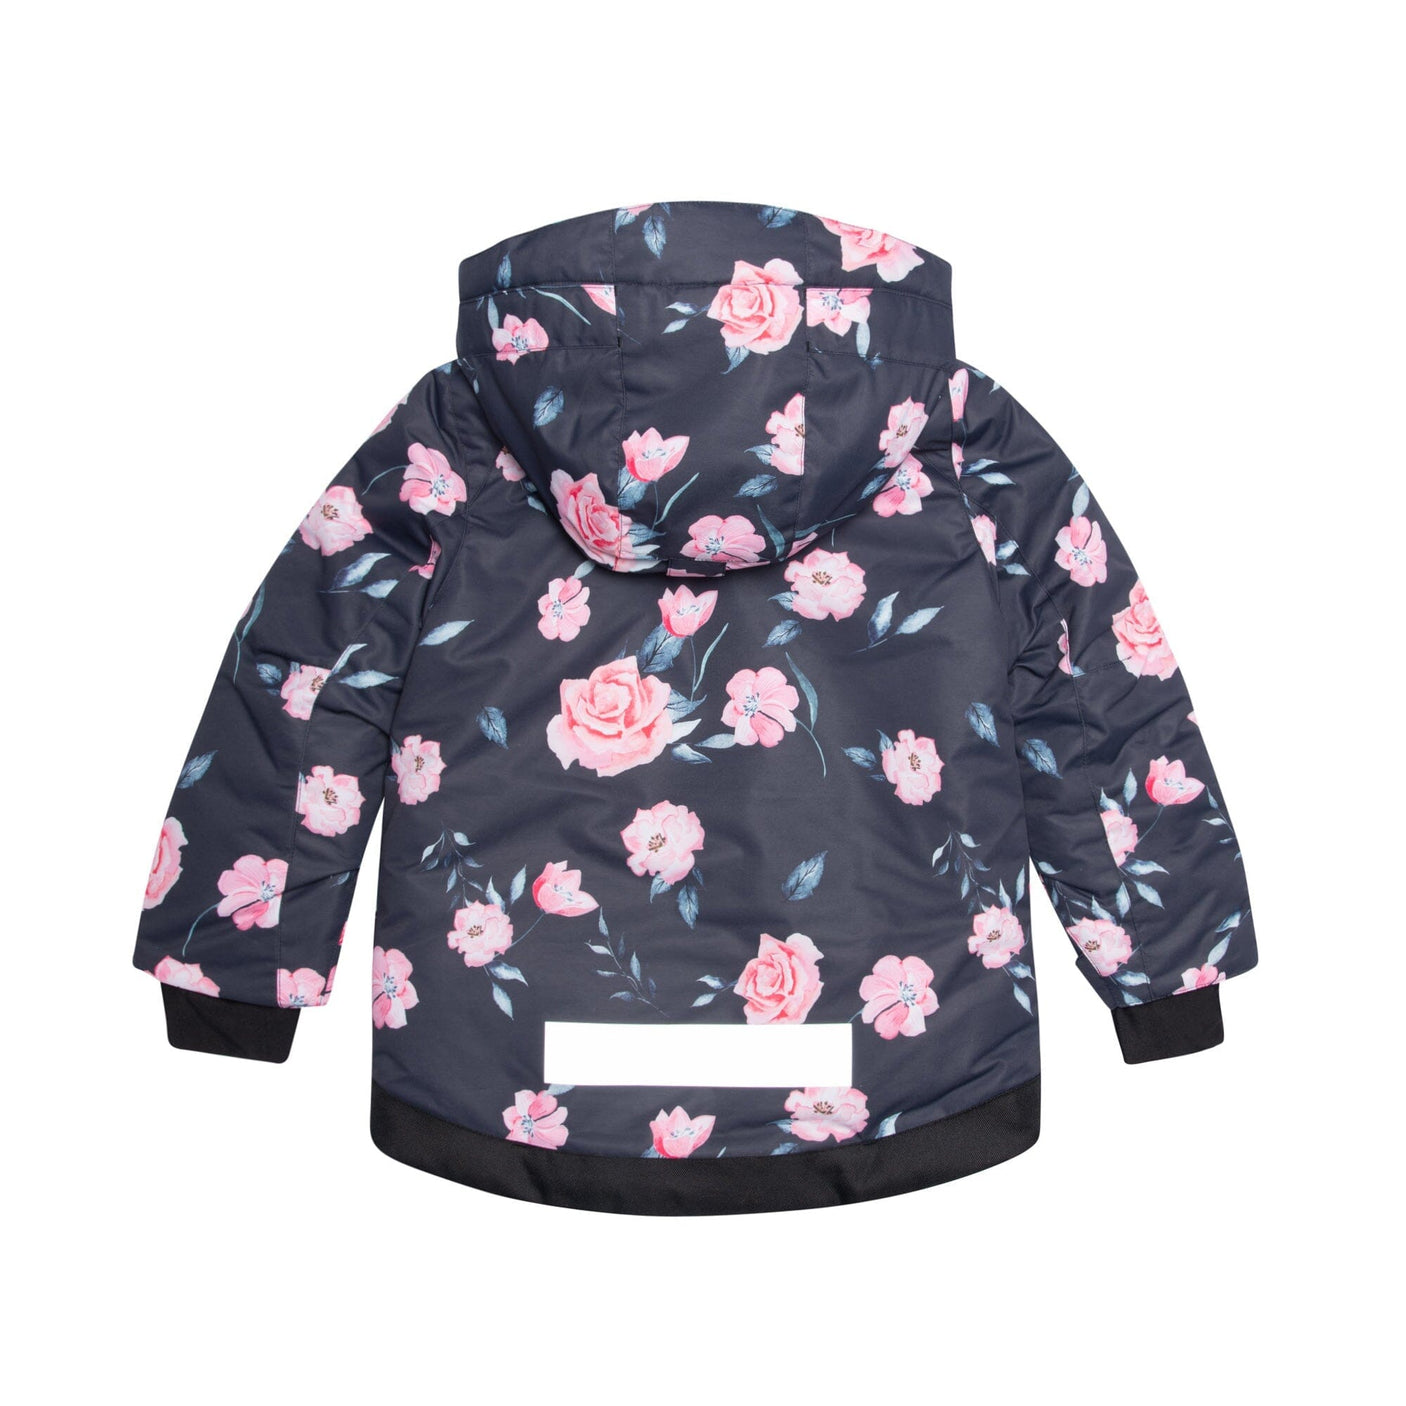 Two Piece Snowsuit Black With Rose Print-4